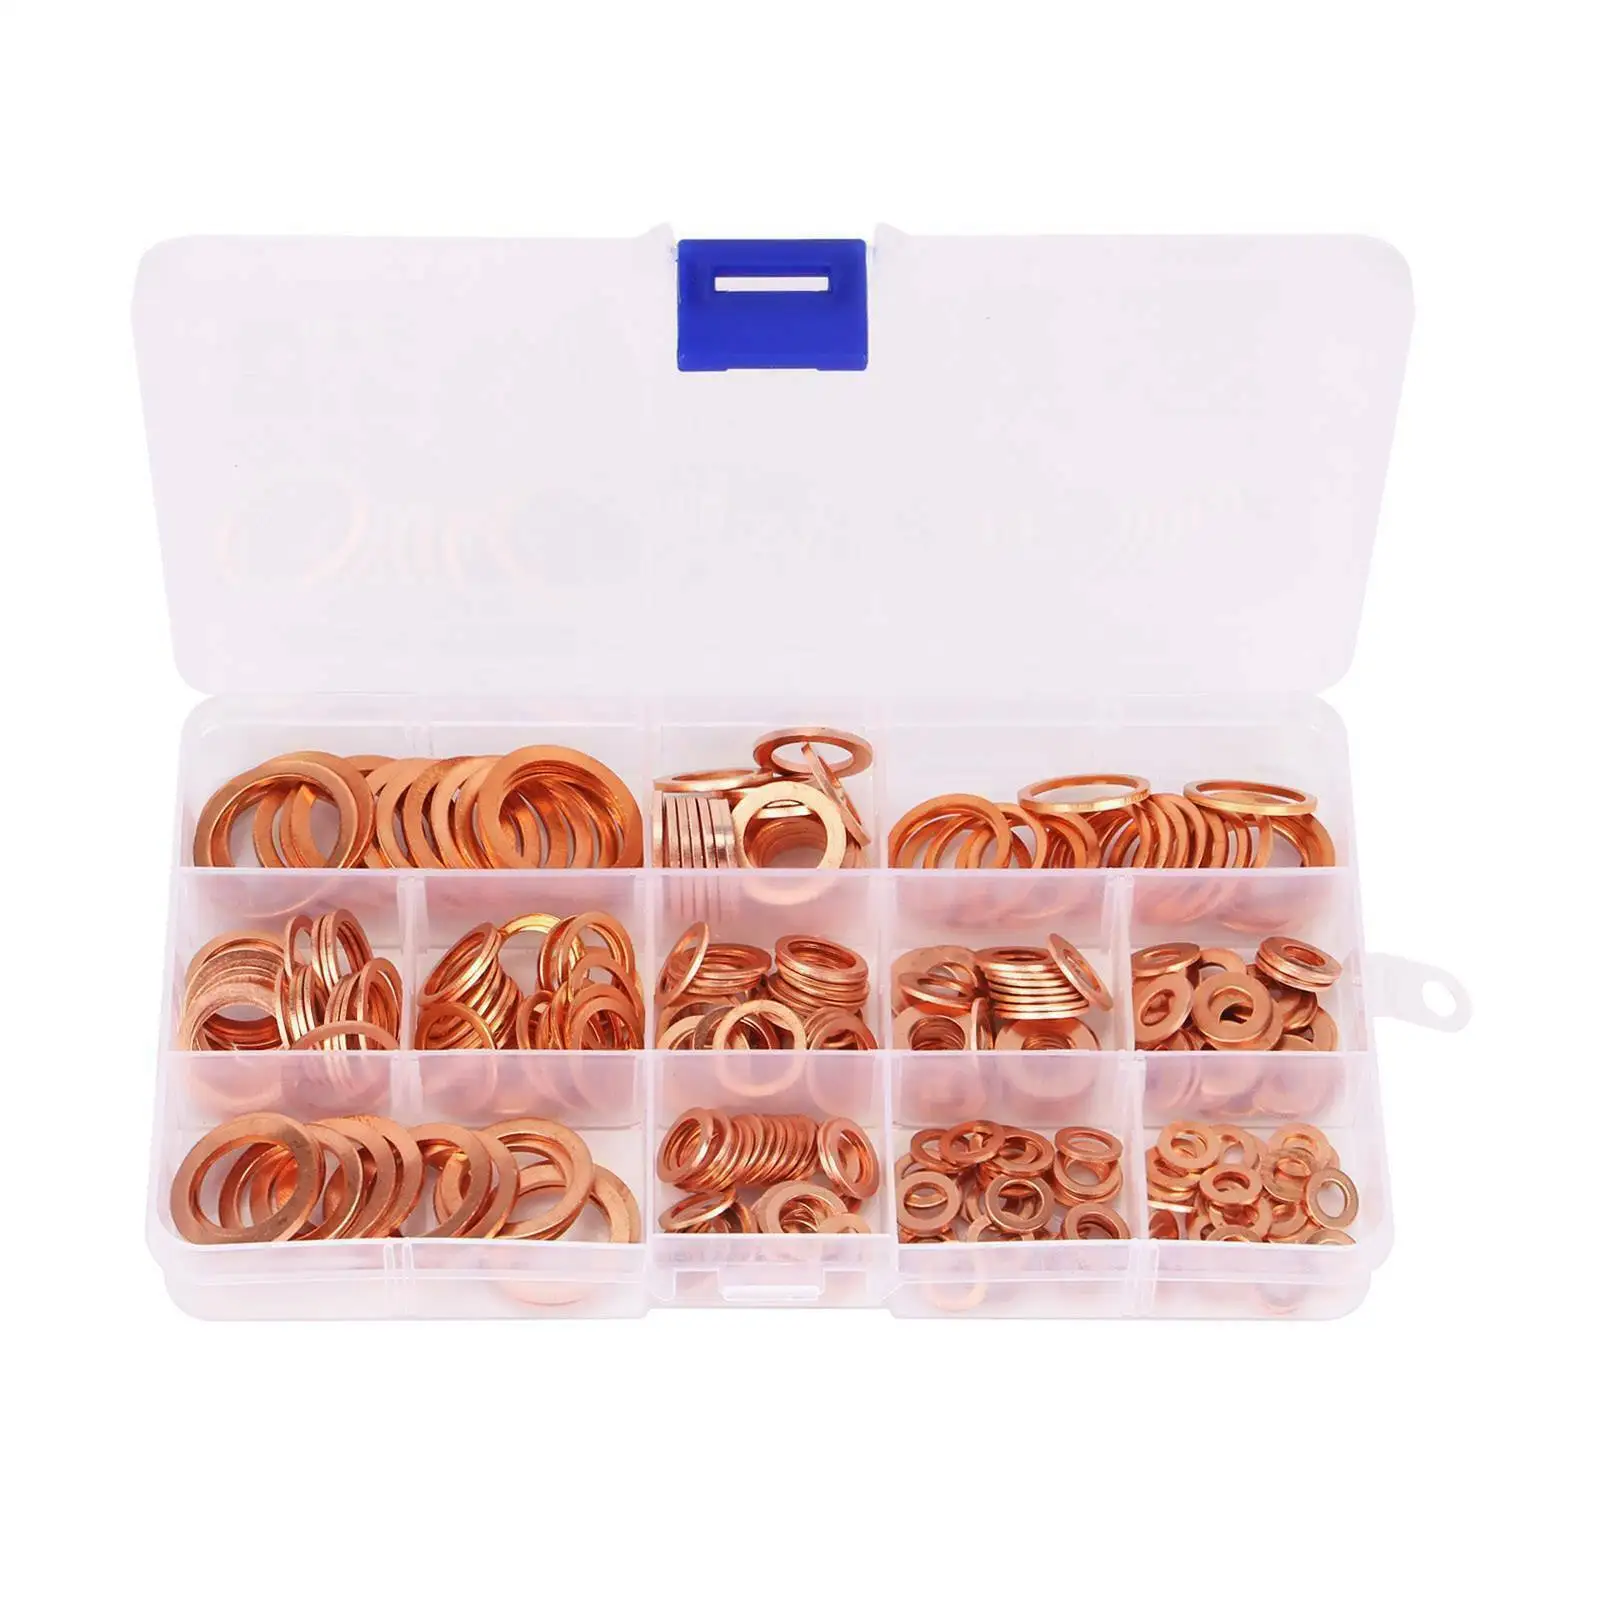 300Pcs Assorted Solid Copper Car Engine Washers Crush Seal Flat Ring Gasket Set for car, bearings, pumps, doors and windows